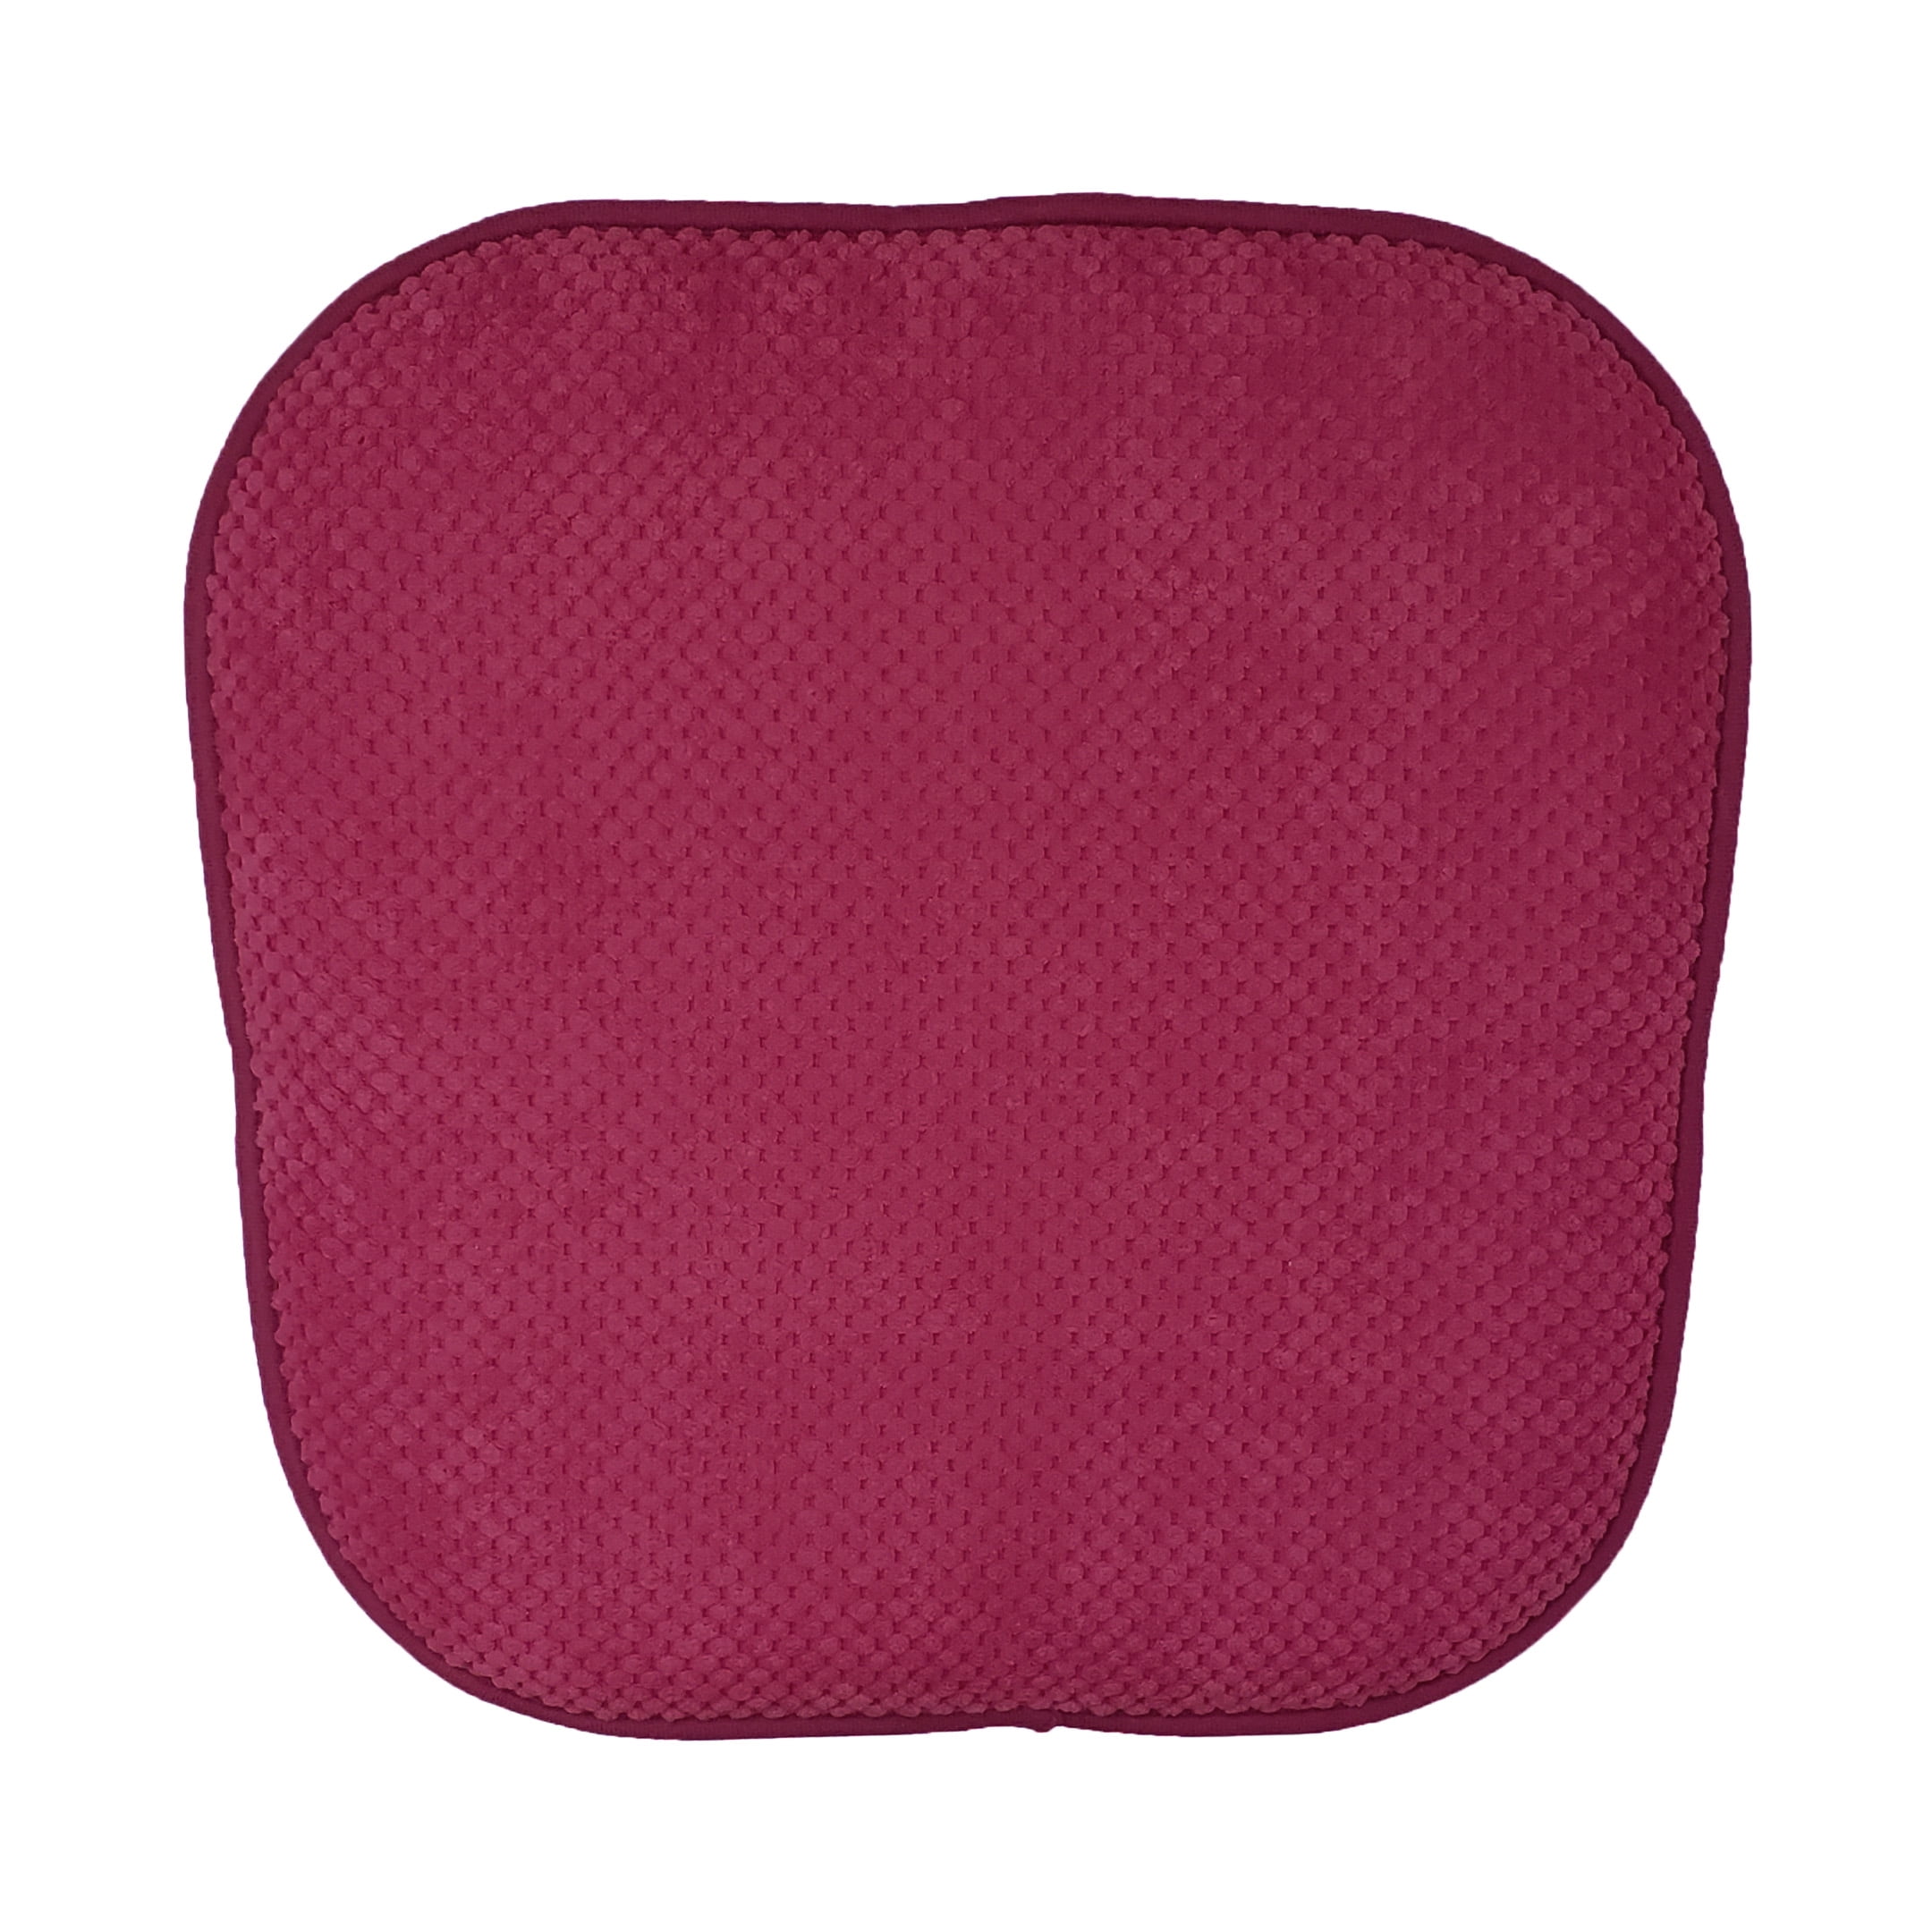 Single (1) Soft Chair Pad Cushion with Non-Skid Backing for Kitchen